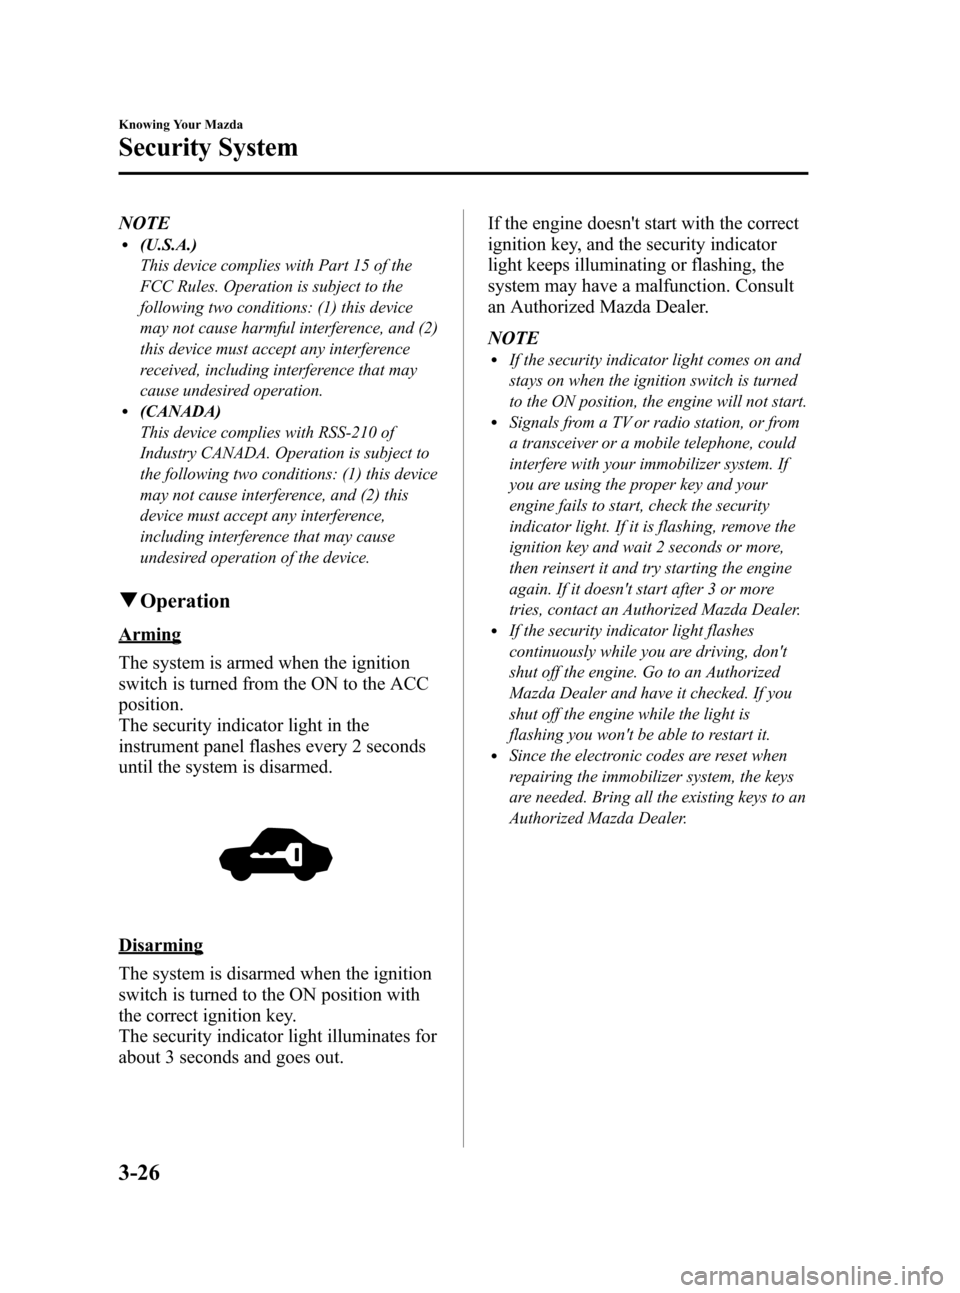 MAZDA MODEL 3 HATCHBACK 2008  Owners Manual (in English) Black plate (98,1)
NOTEl(U.S.A.)
This device complies with Part 15 of the
FCC Rules. Operation is subject to the
following two conditions: (1) this device
may not cause harmful interference, and (2)
t